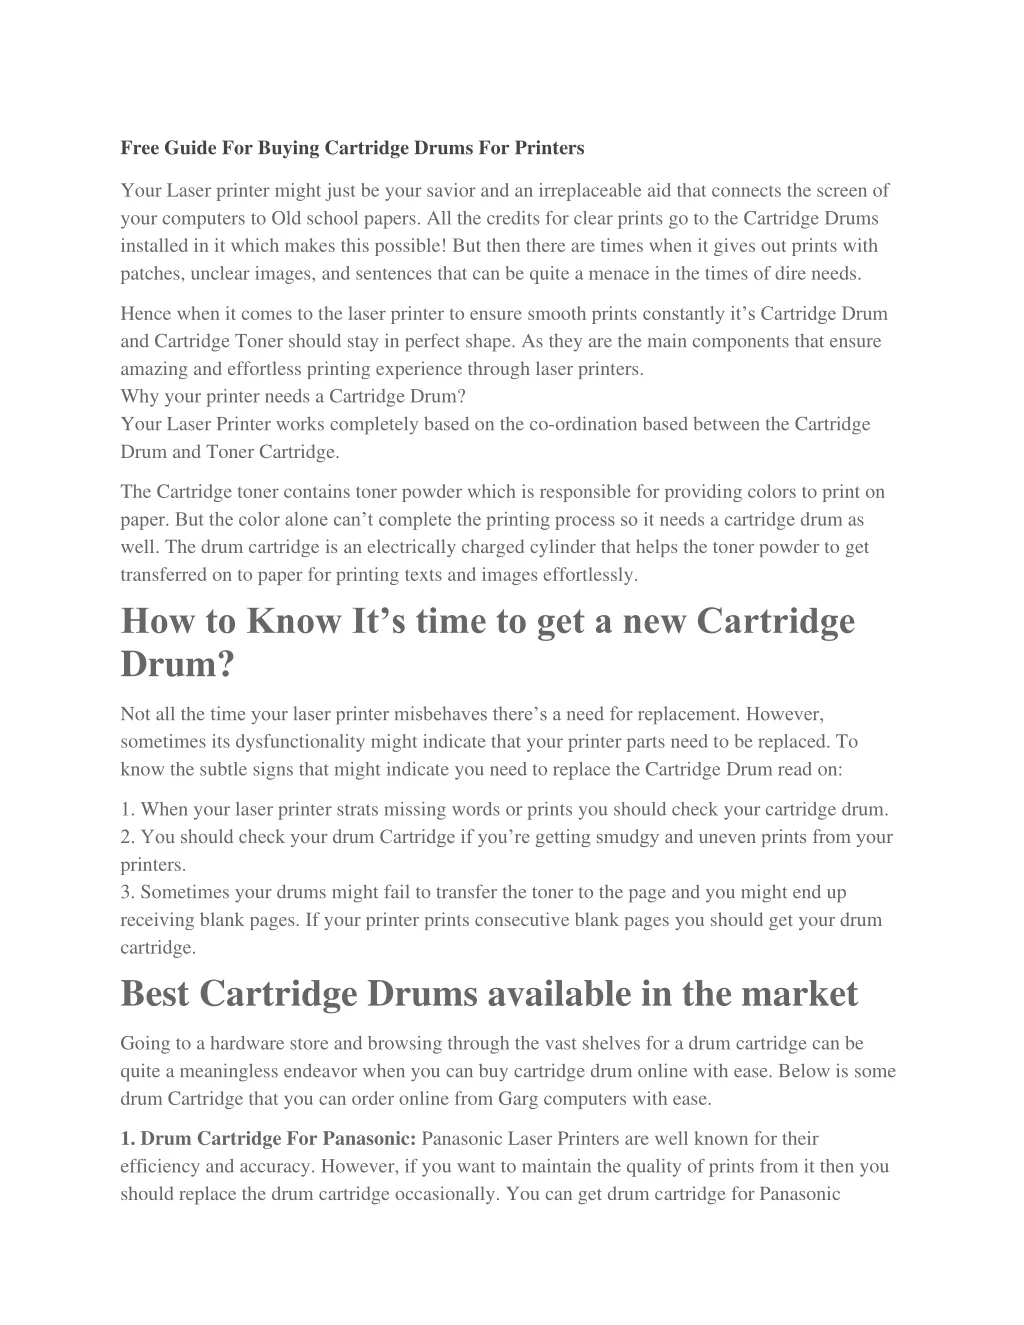 free guide for buying cartridge drums for printers